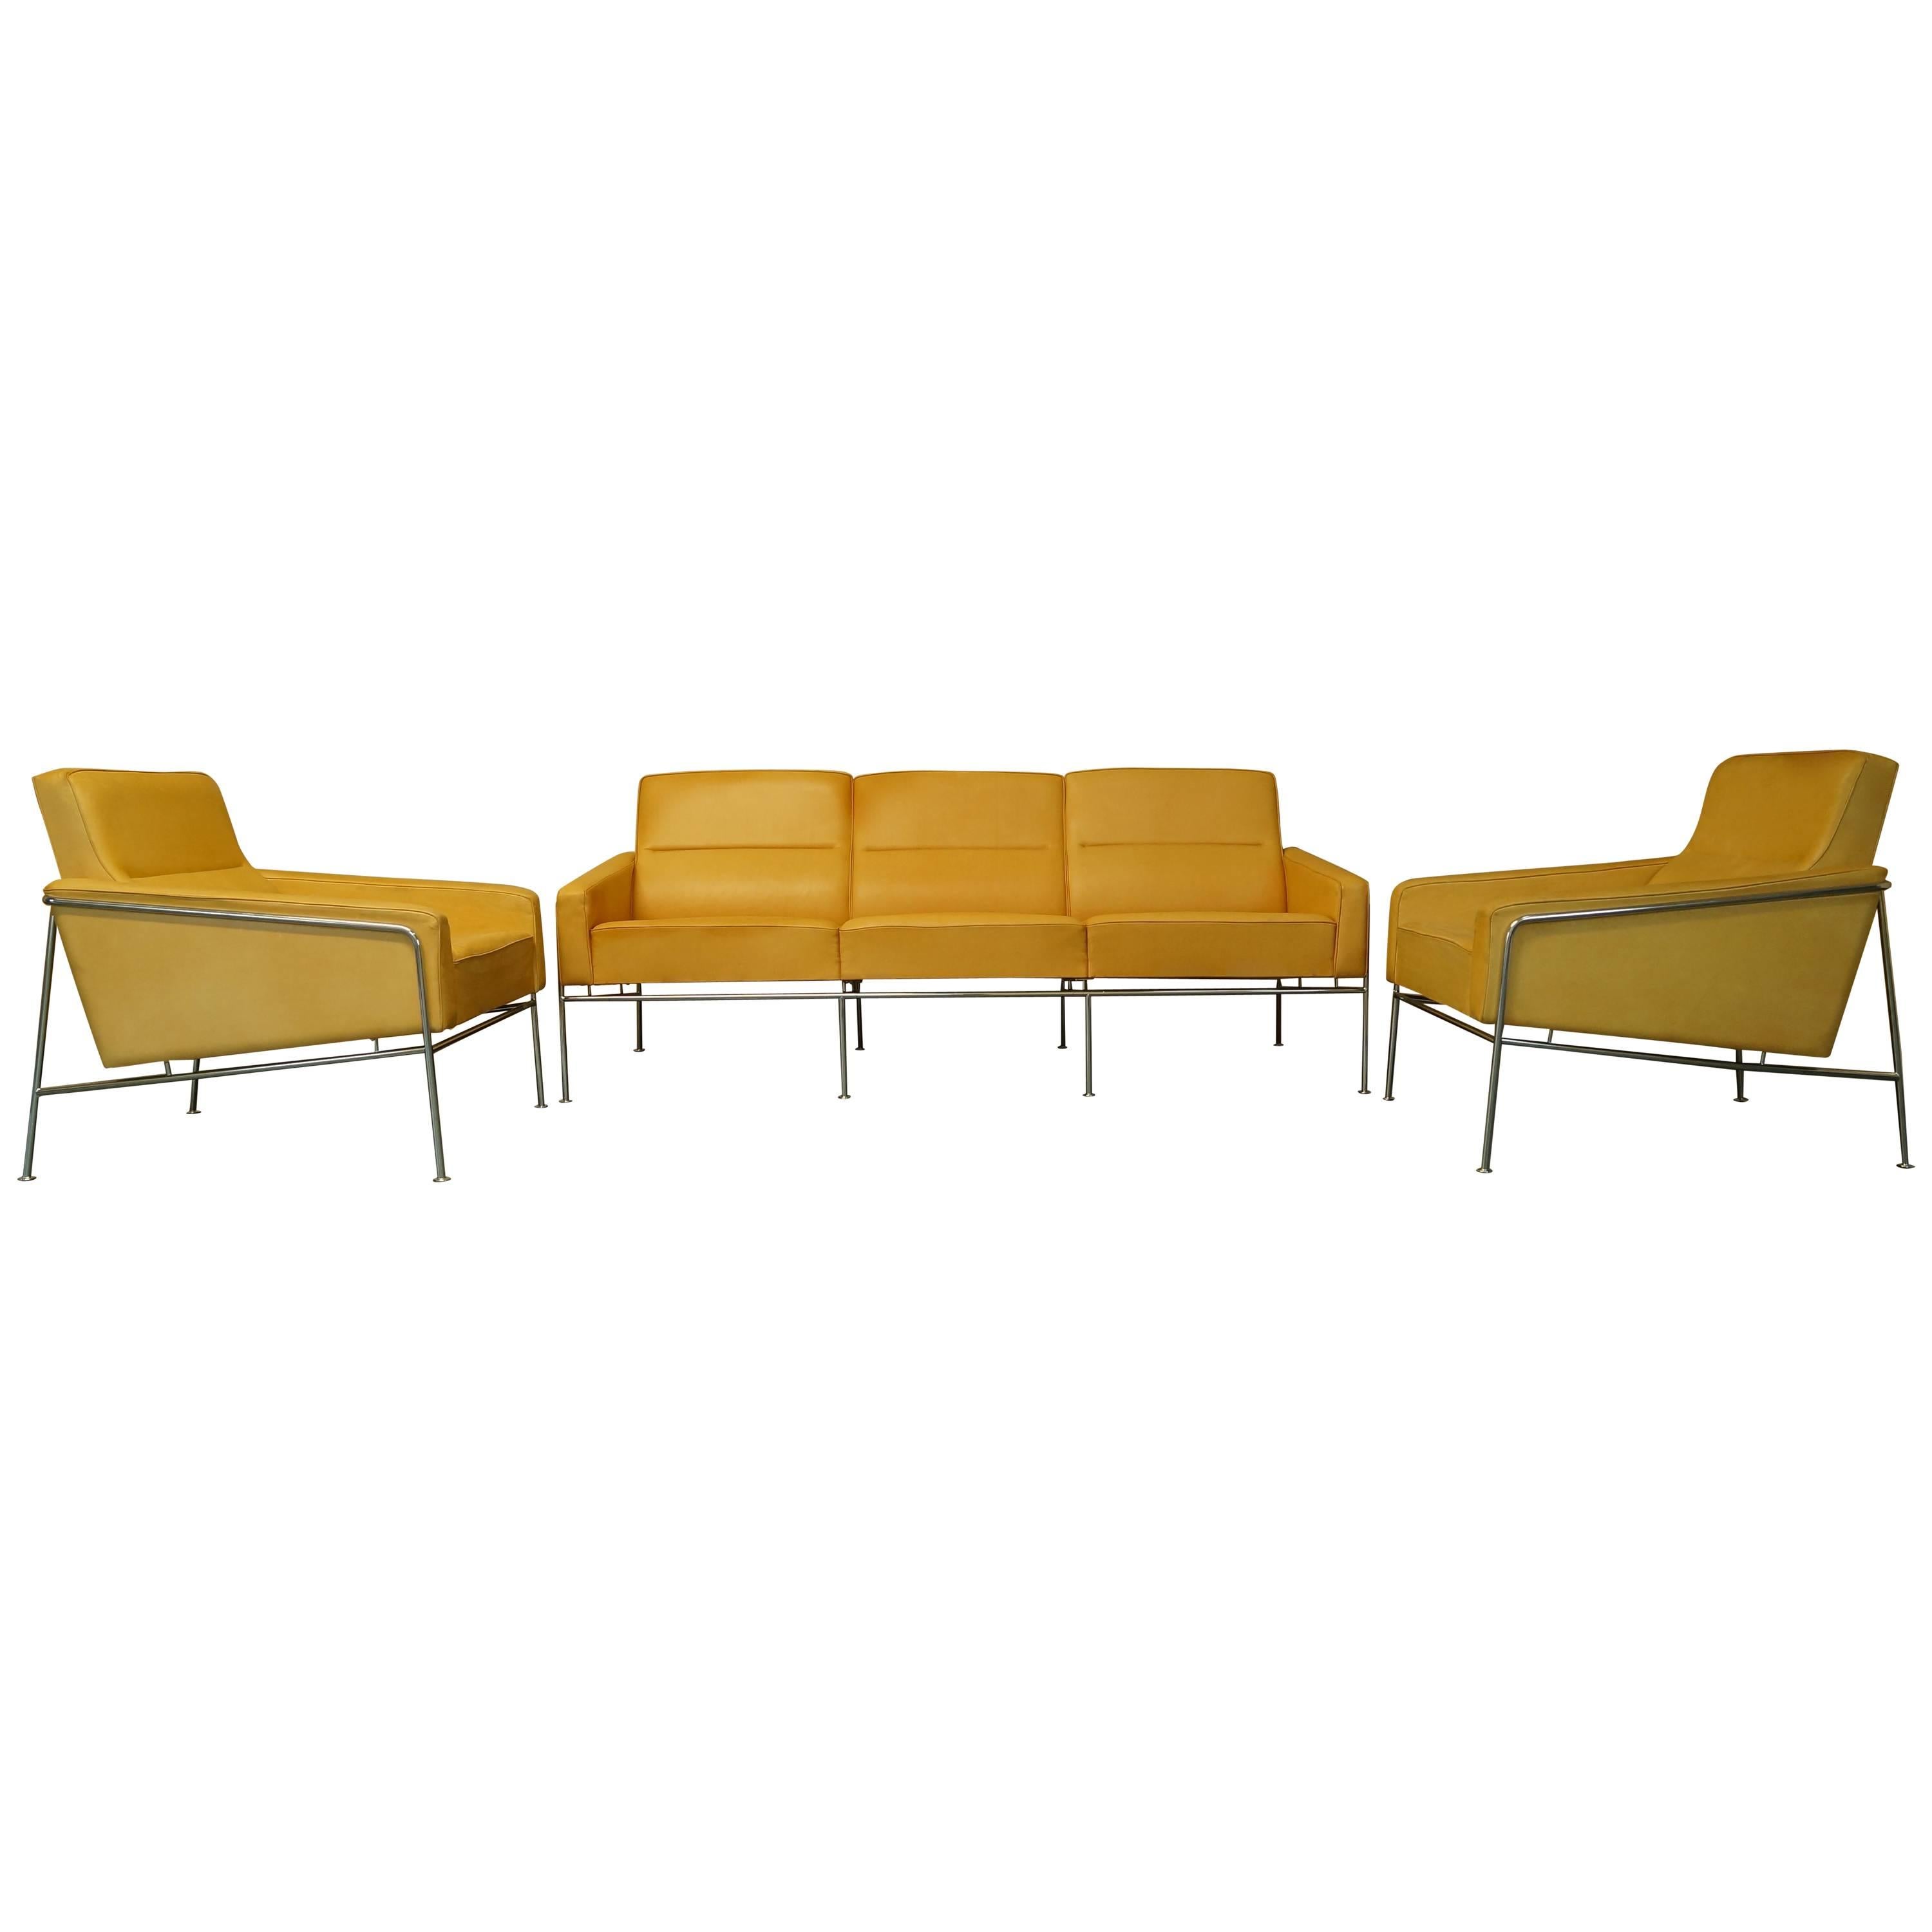 Arne Jacobsen 3300 Lounge Suite, Three-Seat Sofa and Pair of Lounge Chairs